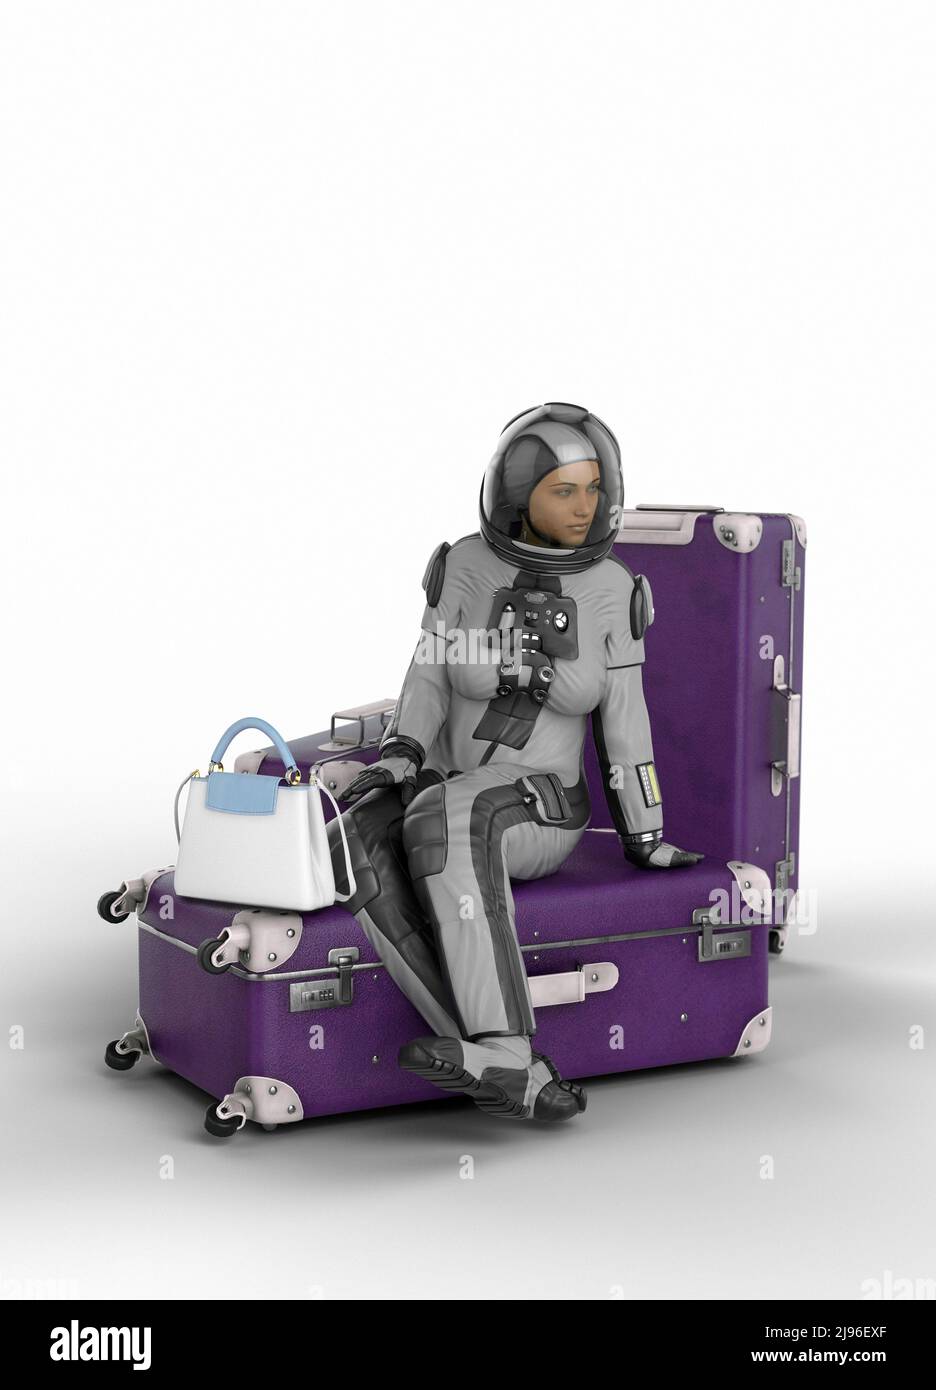 Astronaut waiting for departure to space, illustration Stock Photo